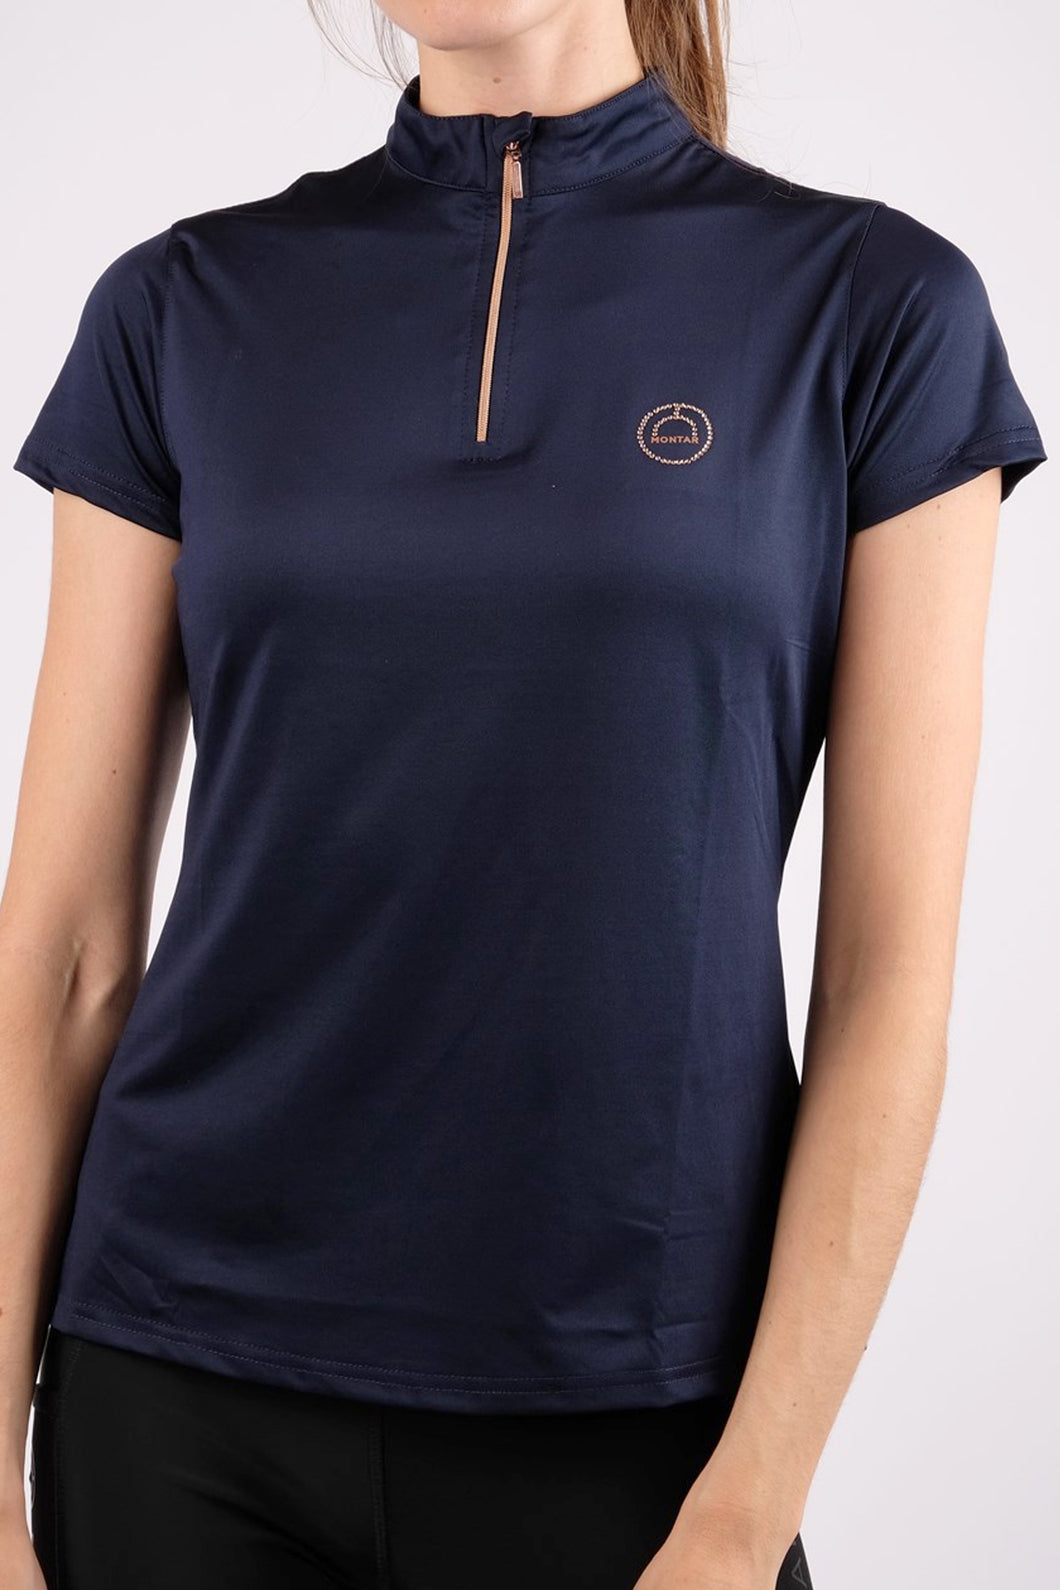 Junior Everly Technical Crystal Polo - Rosegold/Navy